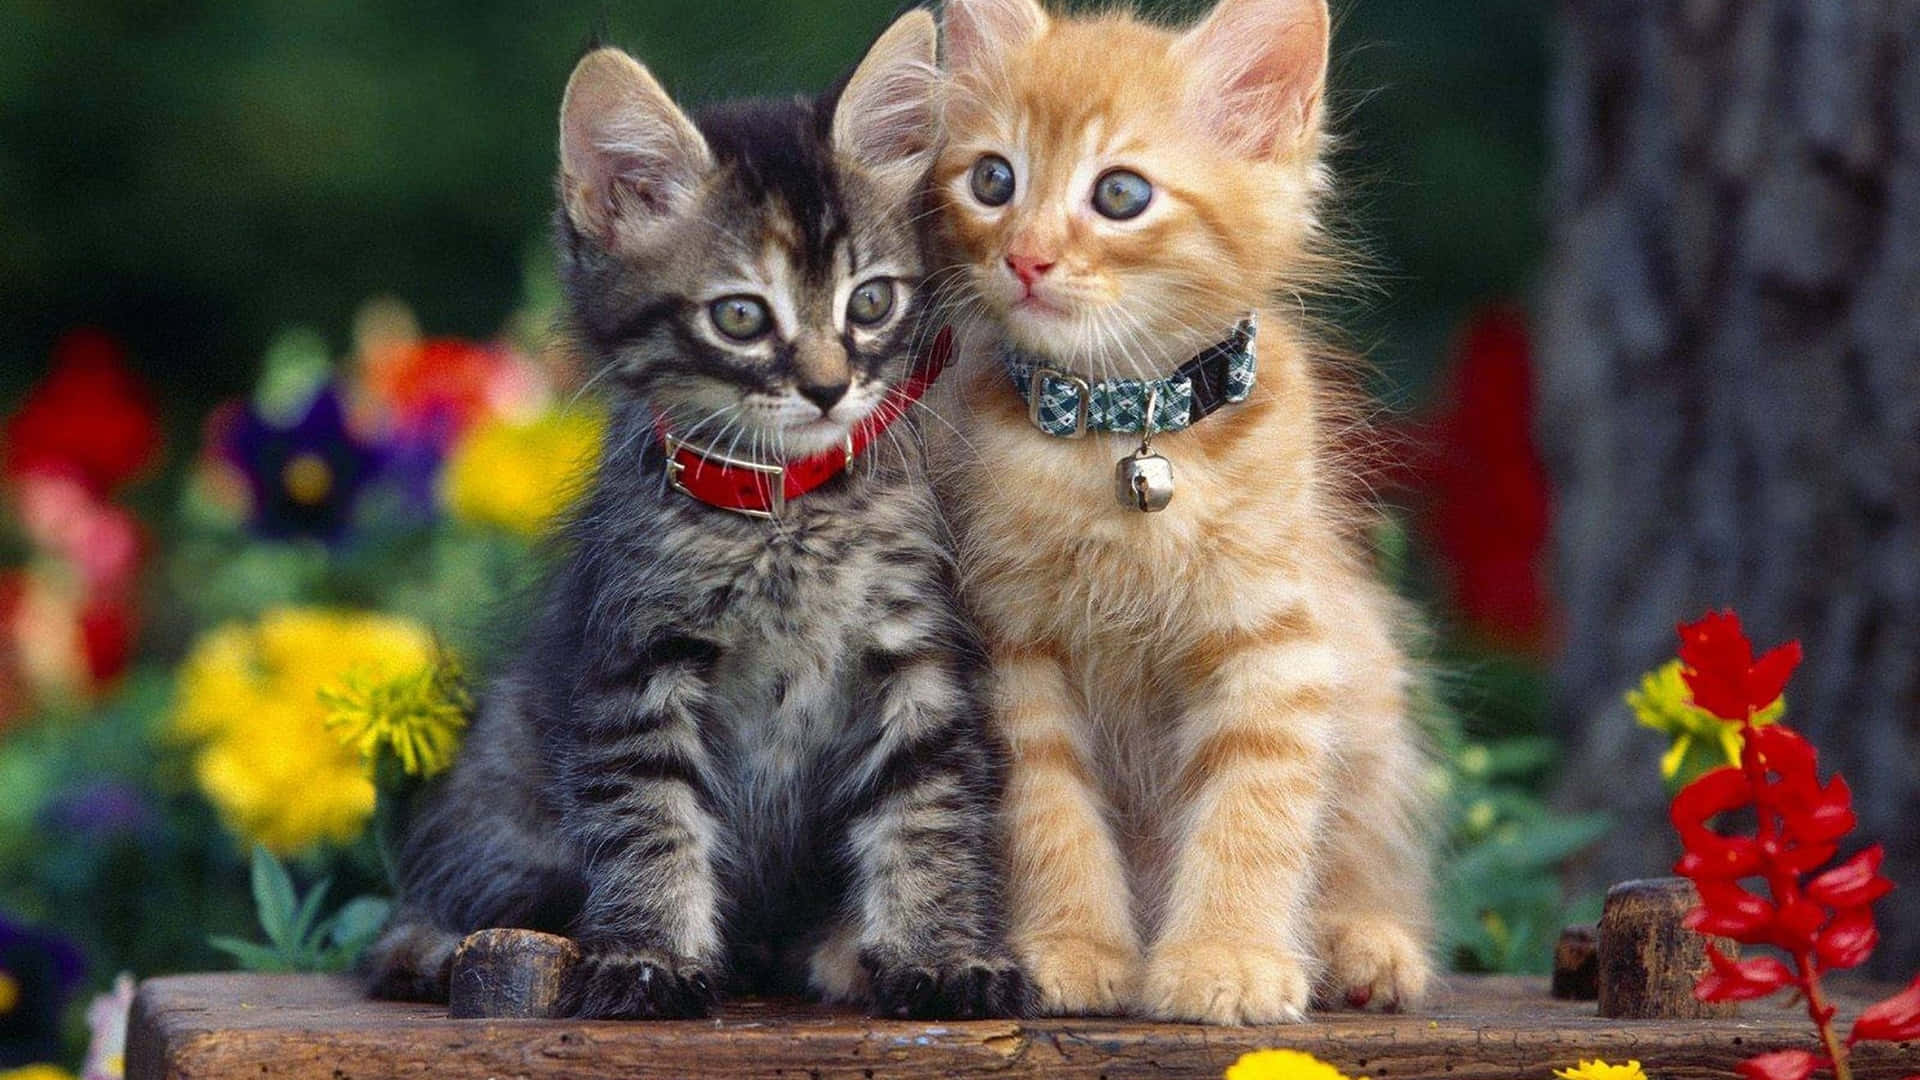 Two Adorable Cute Kittens Looking Up